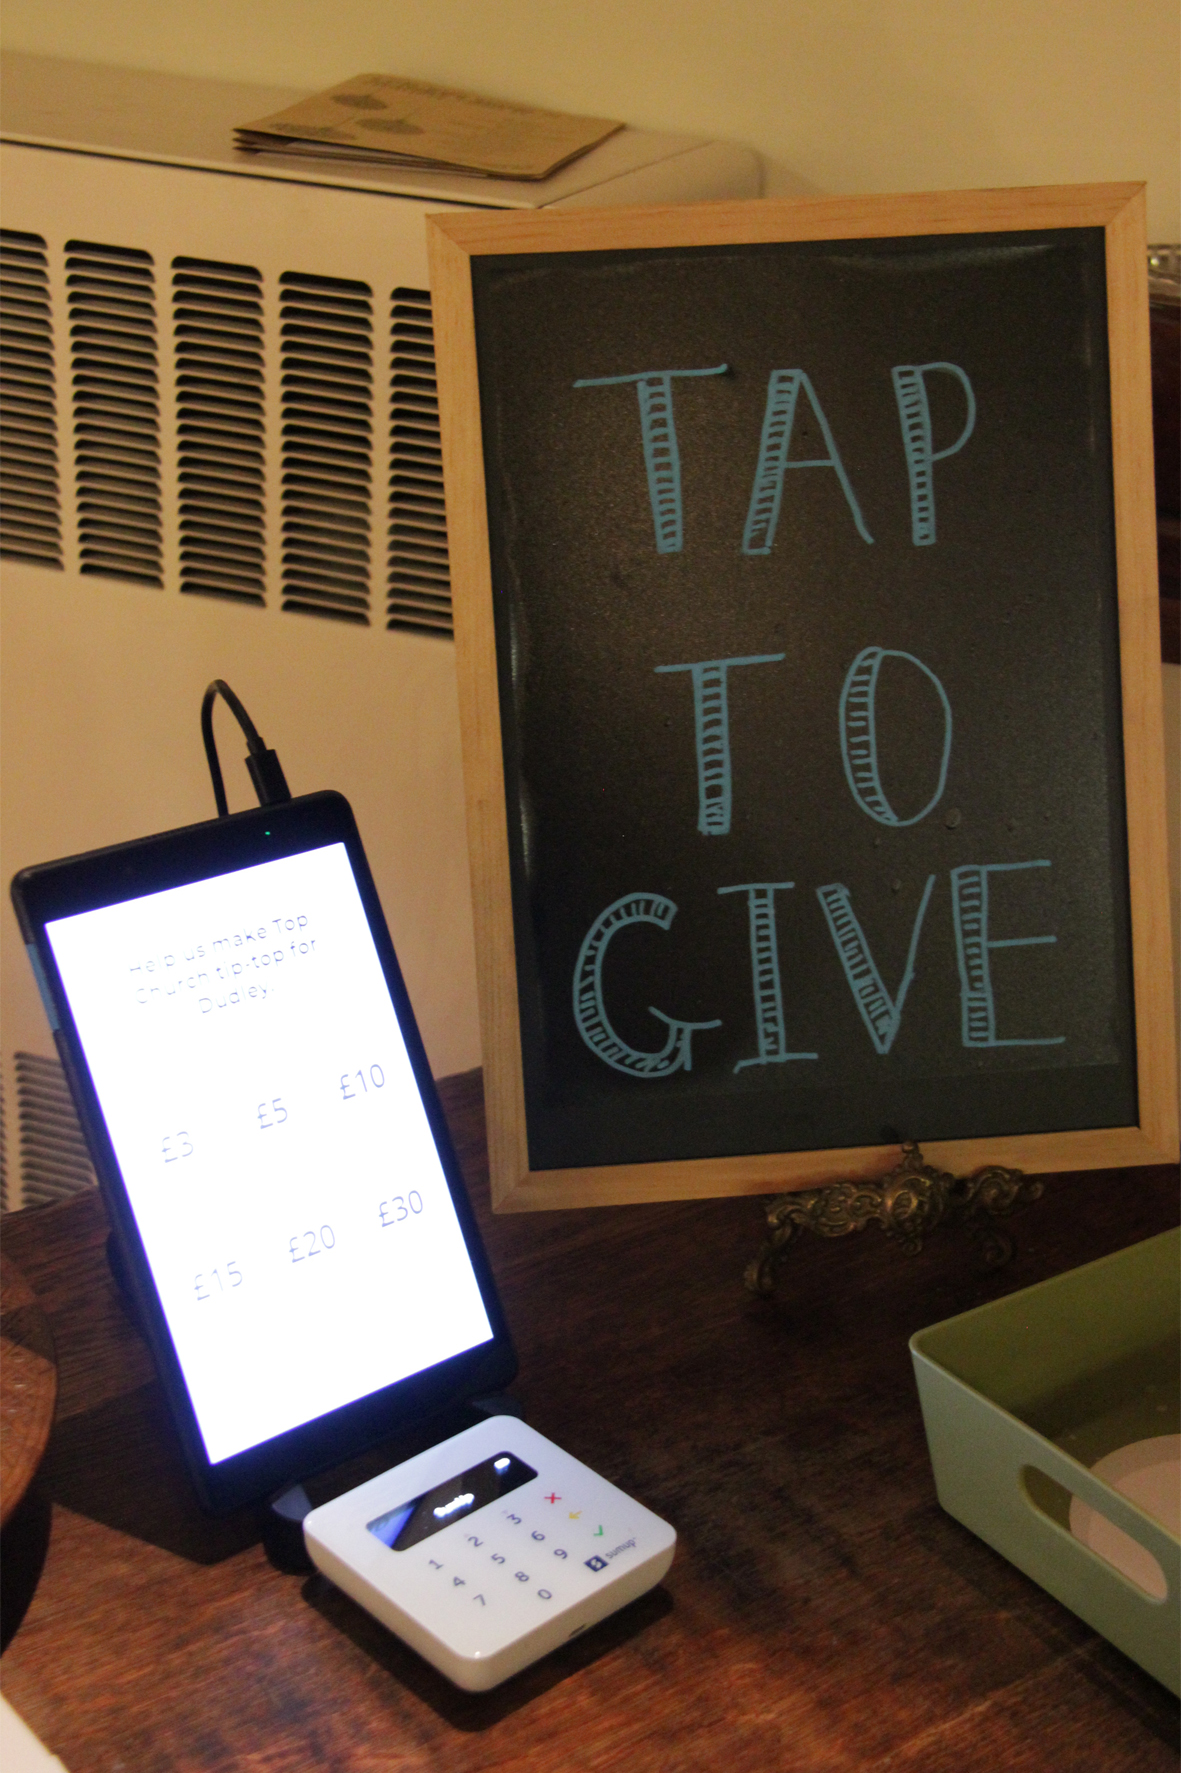 Sum up machine connected to an ipad with a 'tap to give' sign